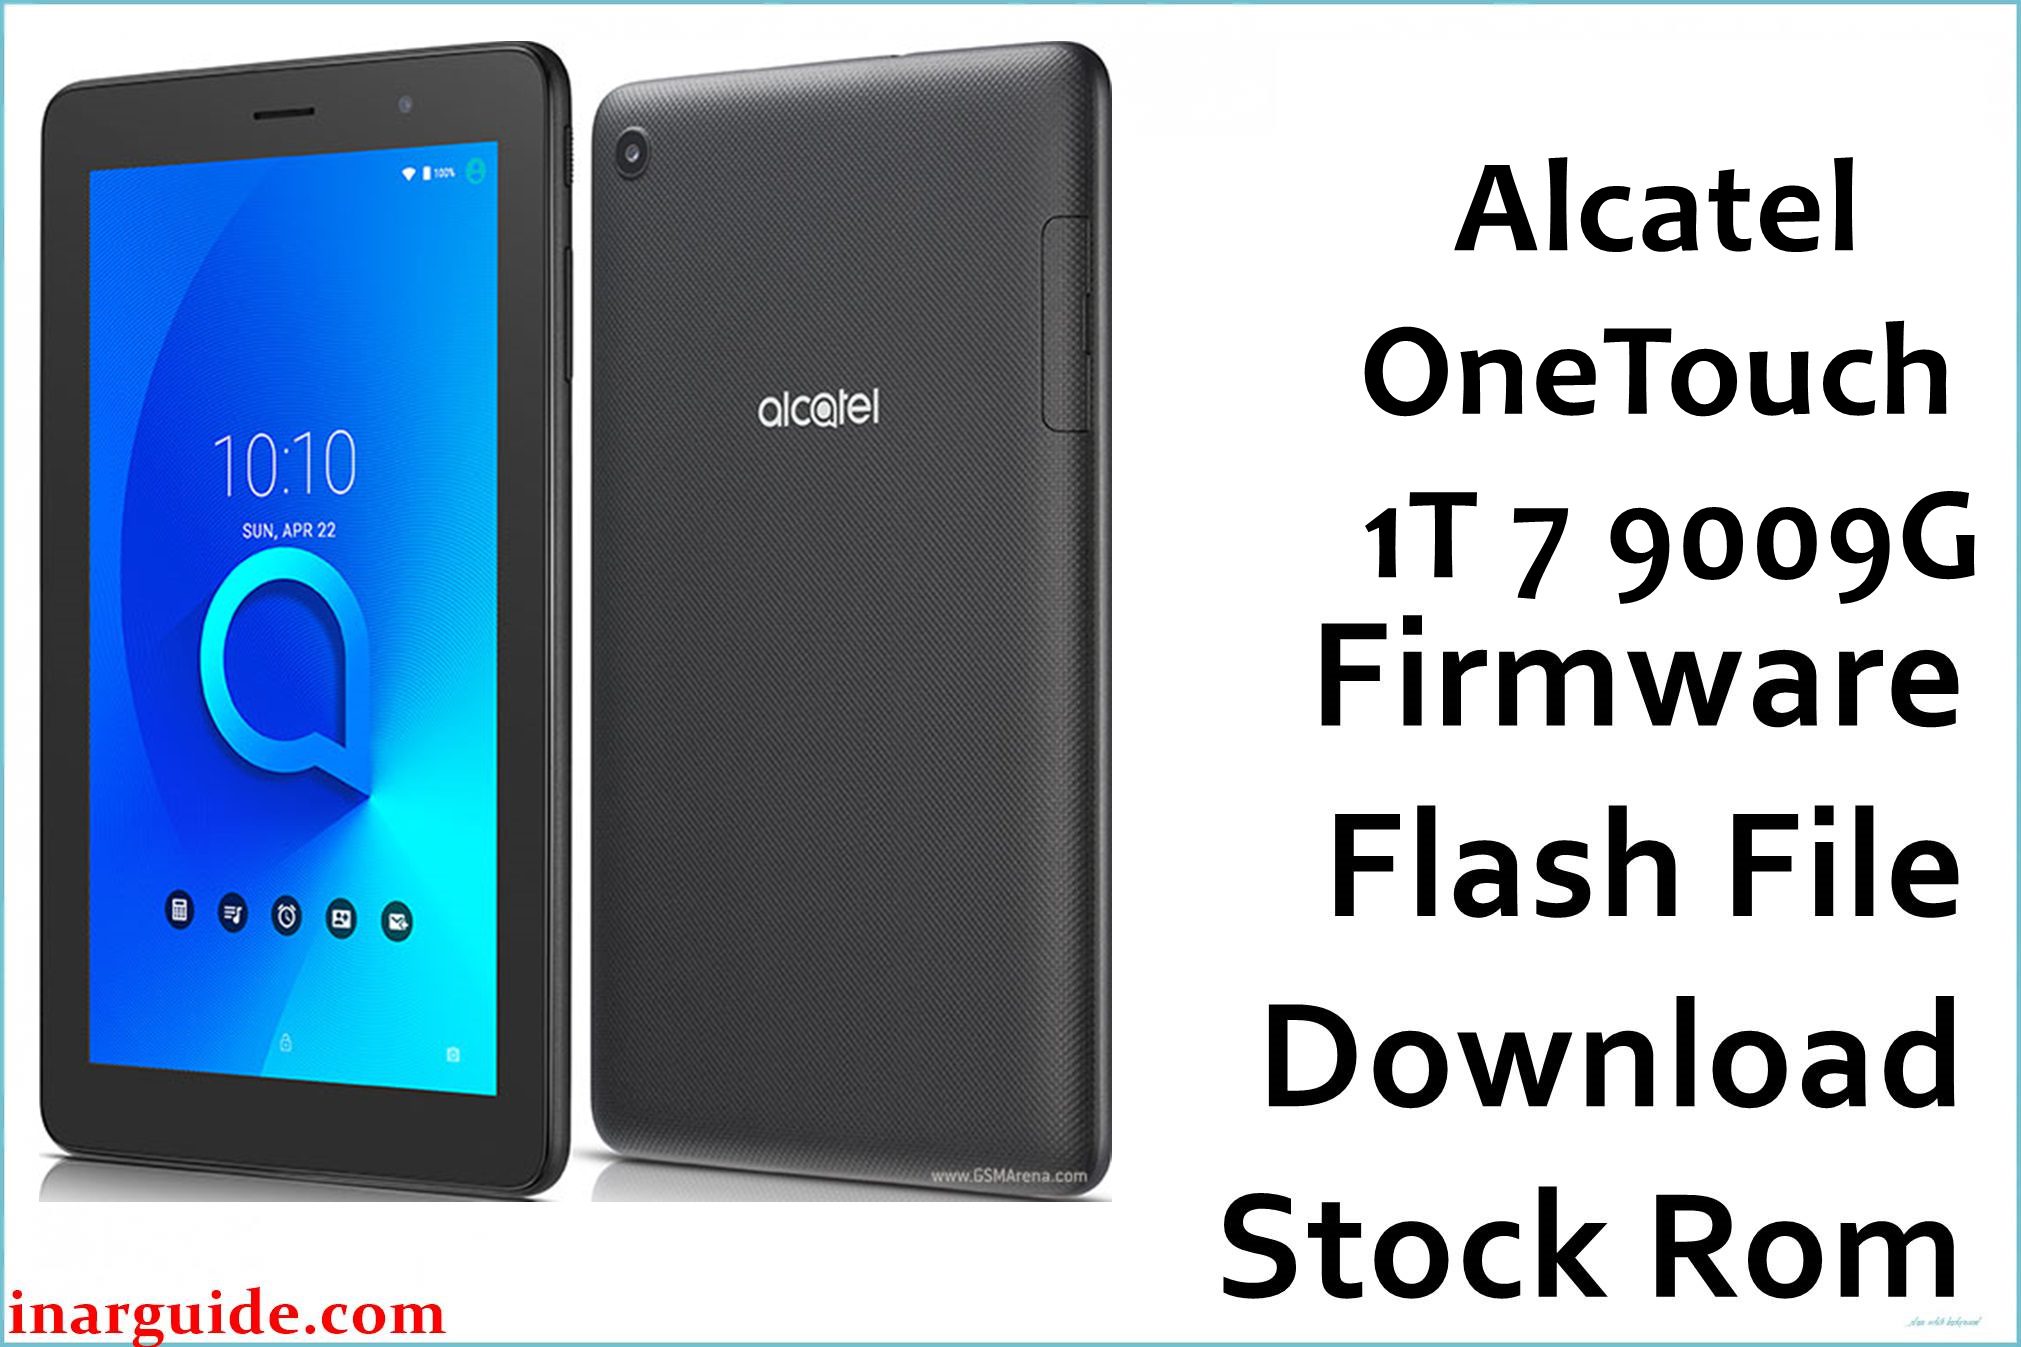 Alcatel OneTouch 1T 7 9009G